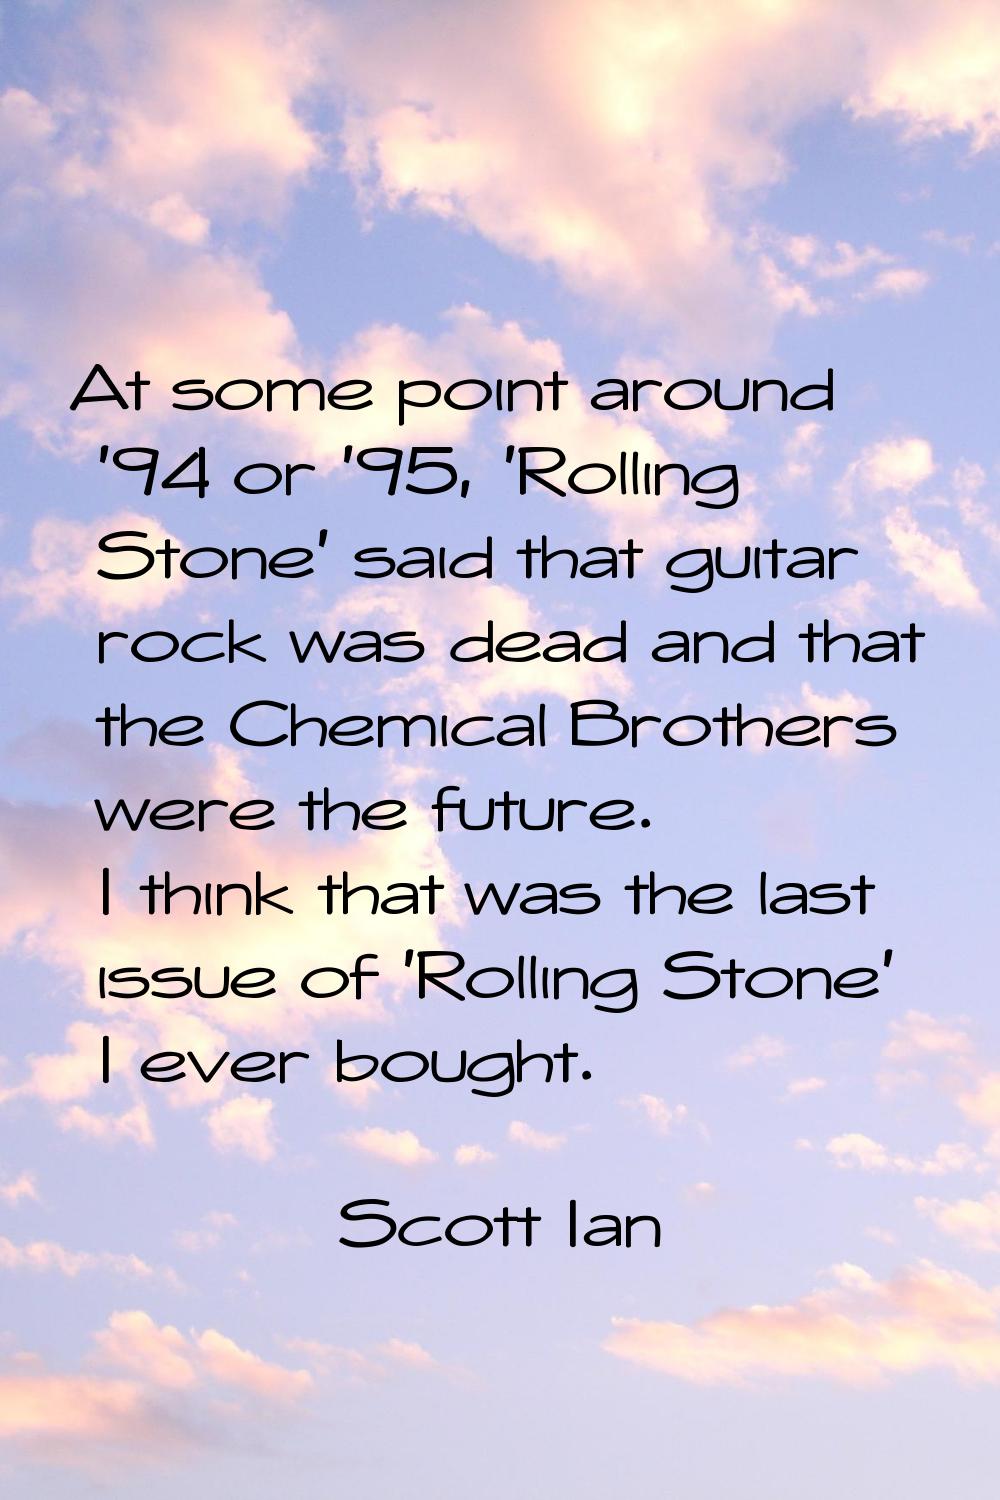 At some point around '94 or '95, 'Rolling Stone' said that guitar rock was dead and that the Chemic